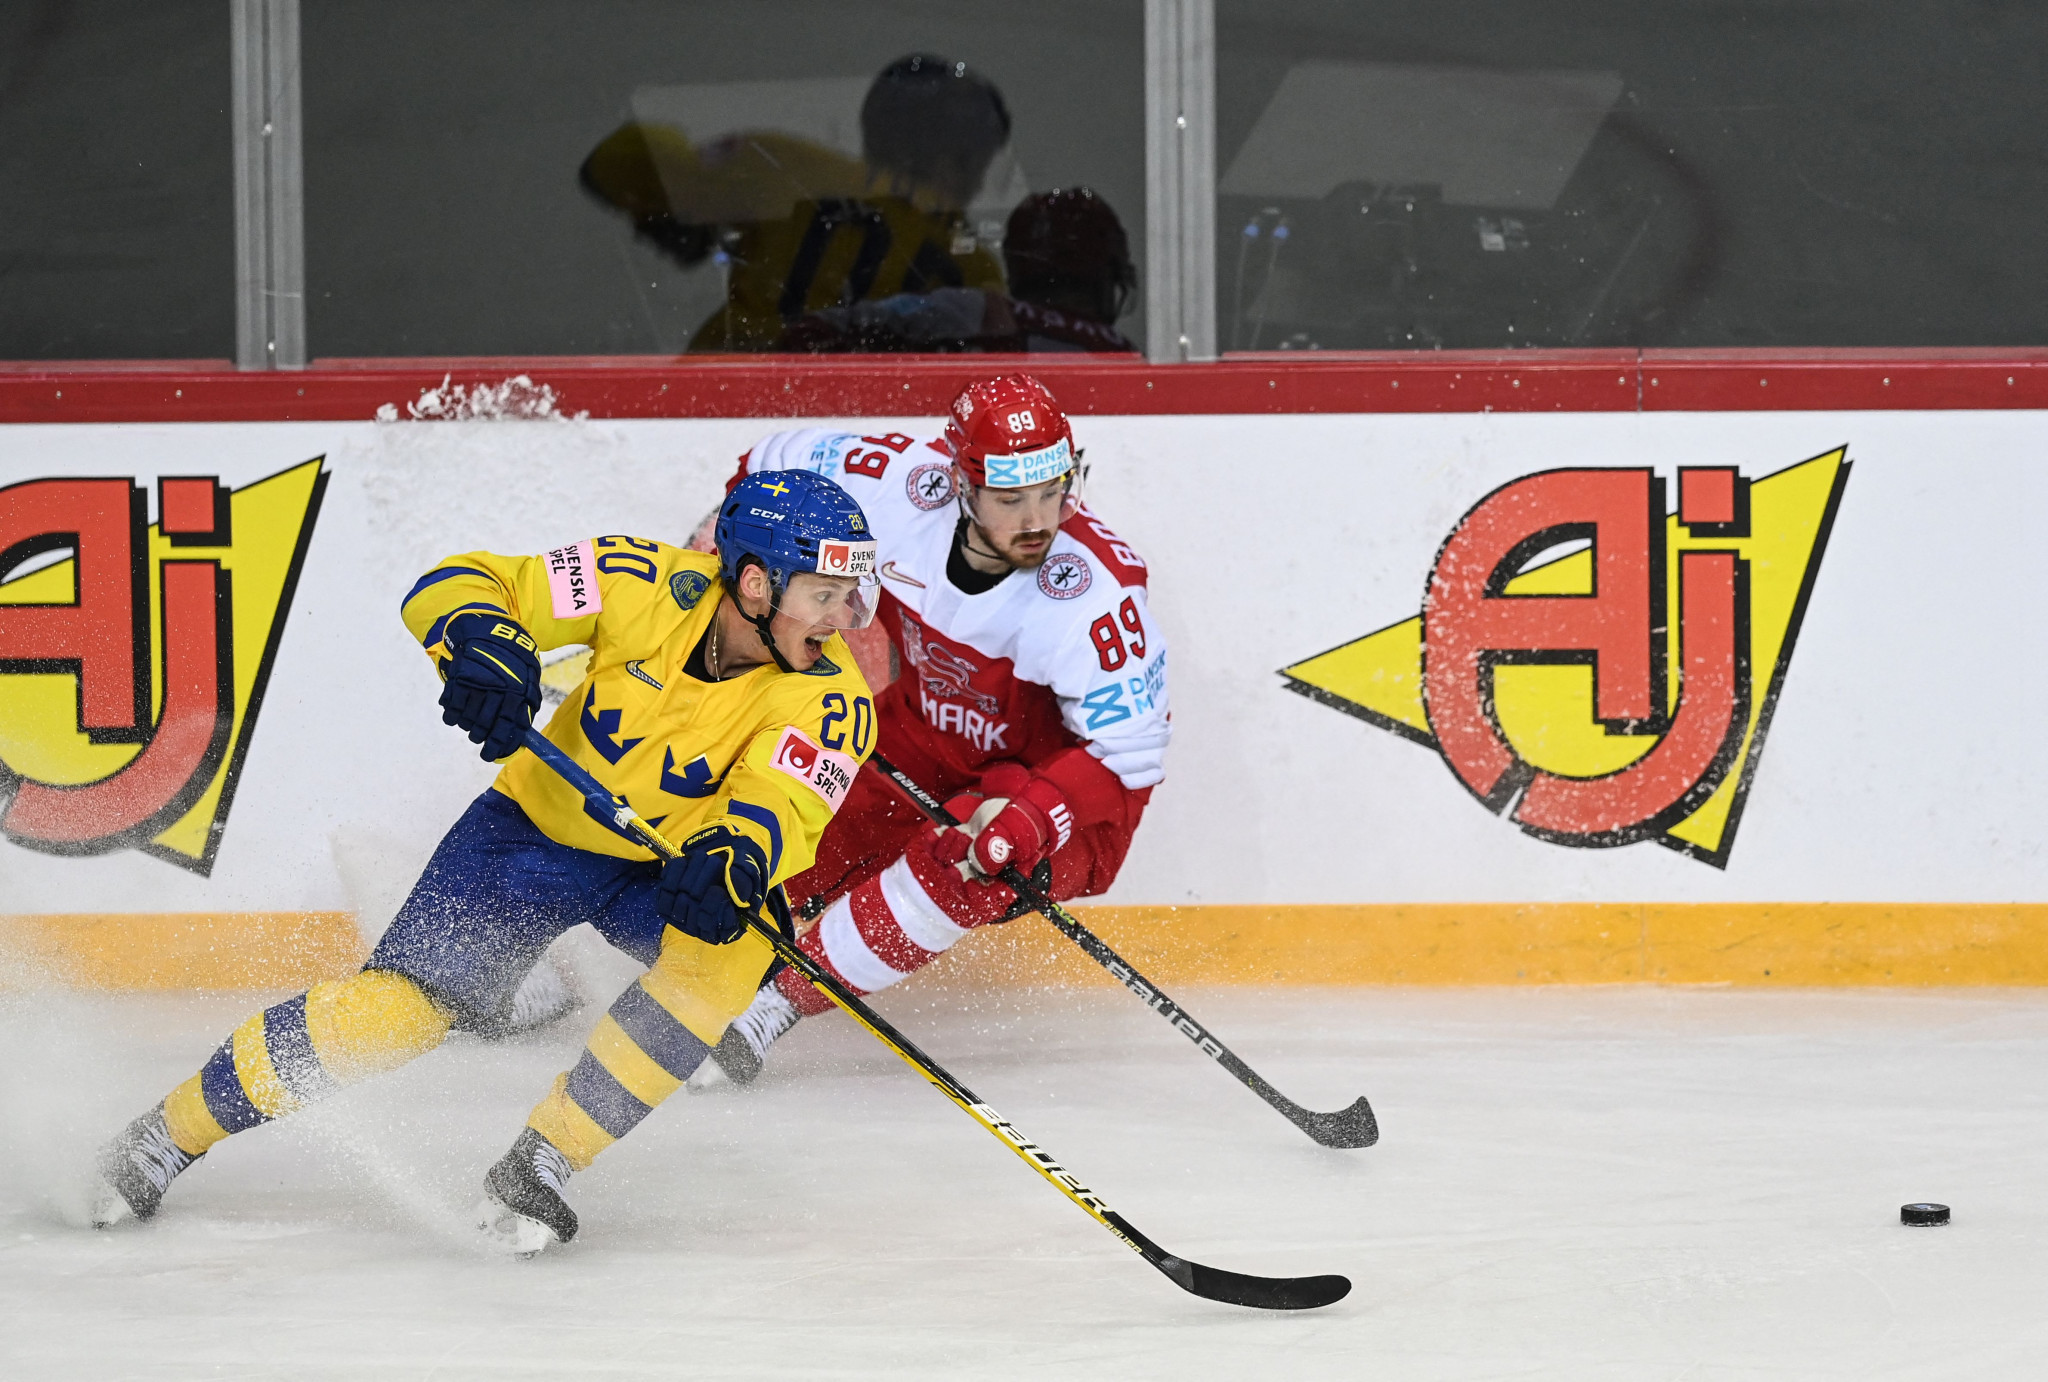 Stockholm and Herning to stage 2025 IIHF World Championship matches